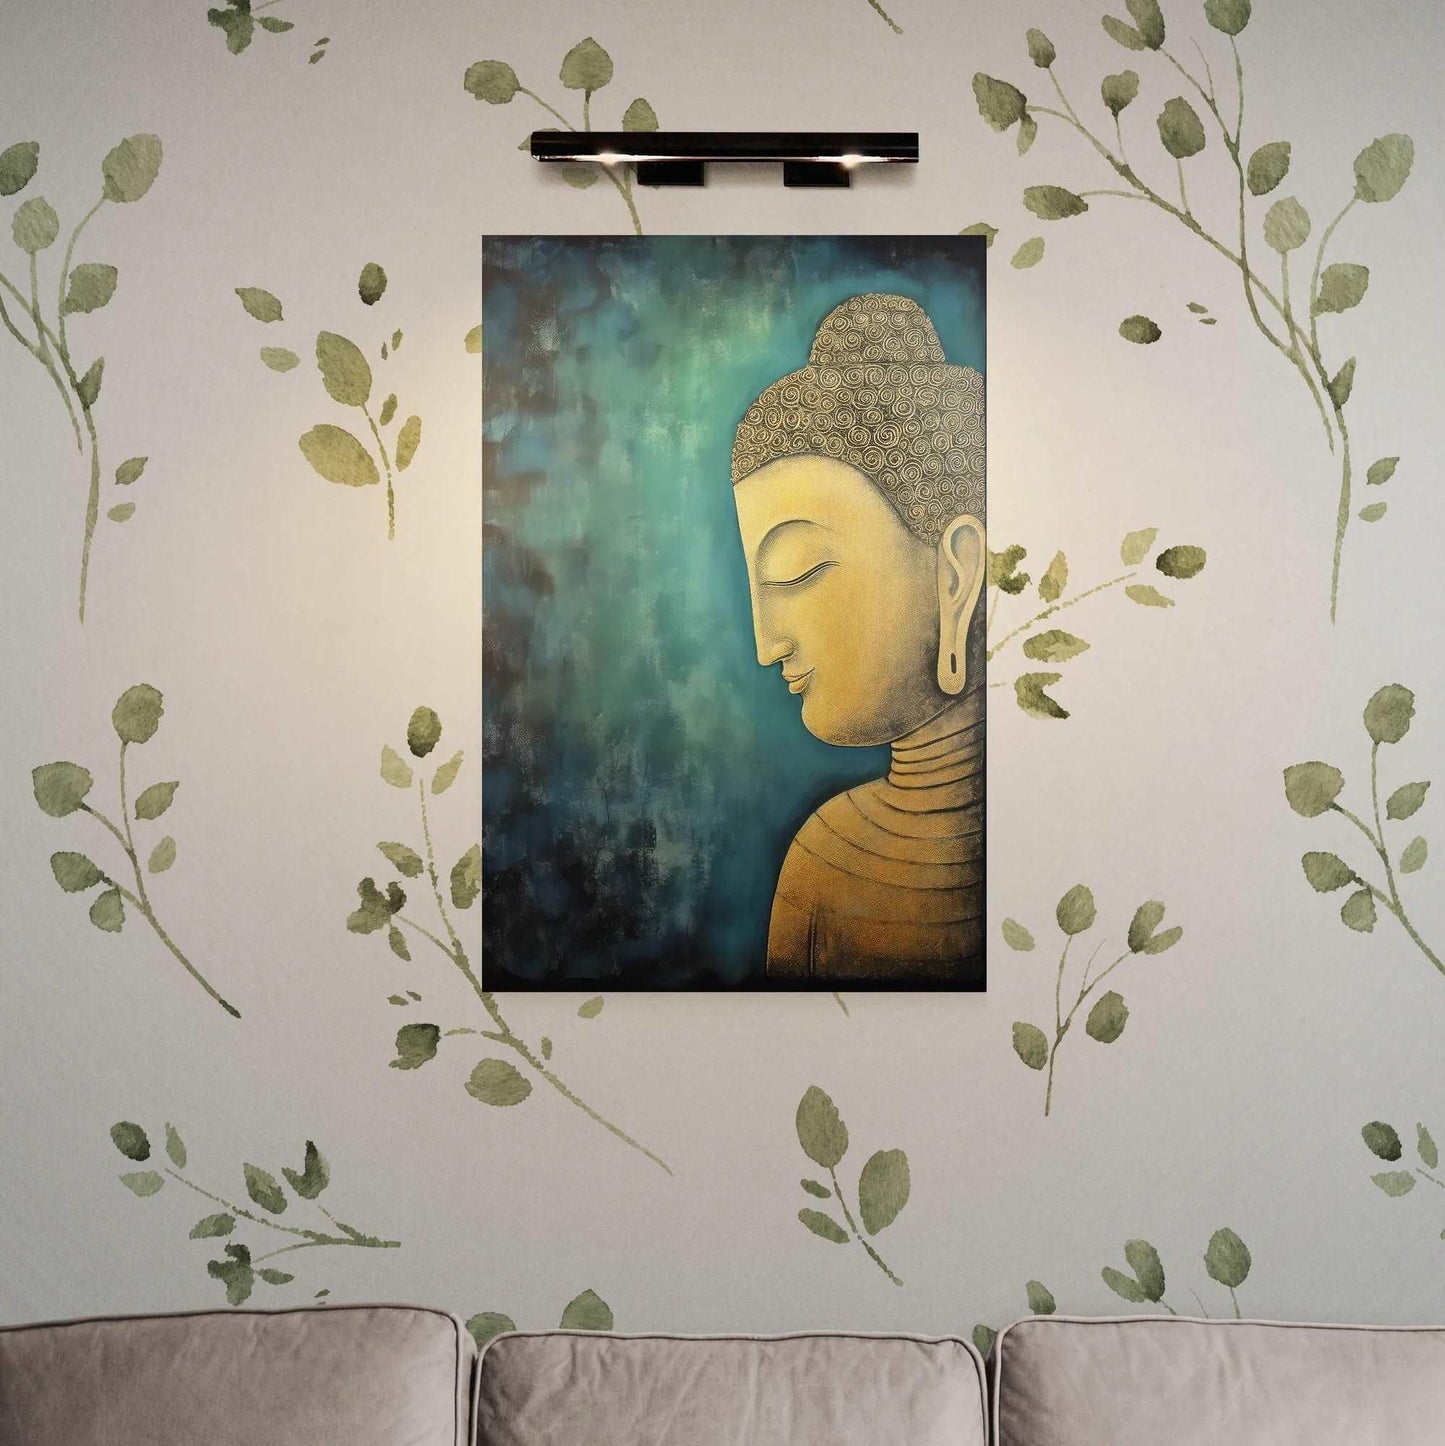 Tranquil Buddha painting surrounded by painted green leaves, creating a serene environment in a modern living space.